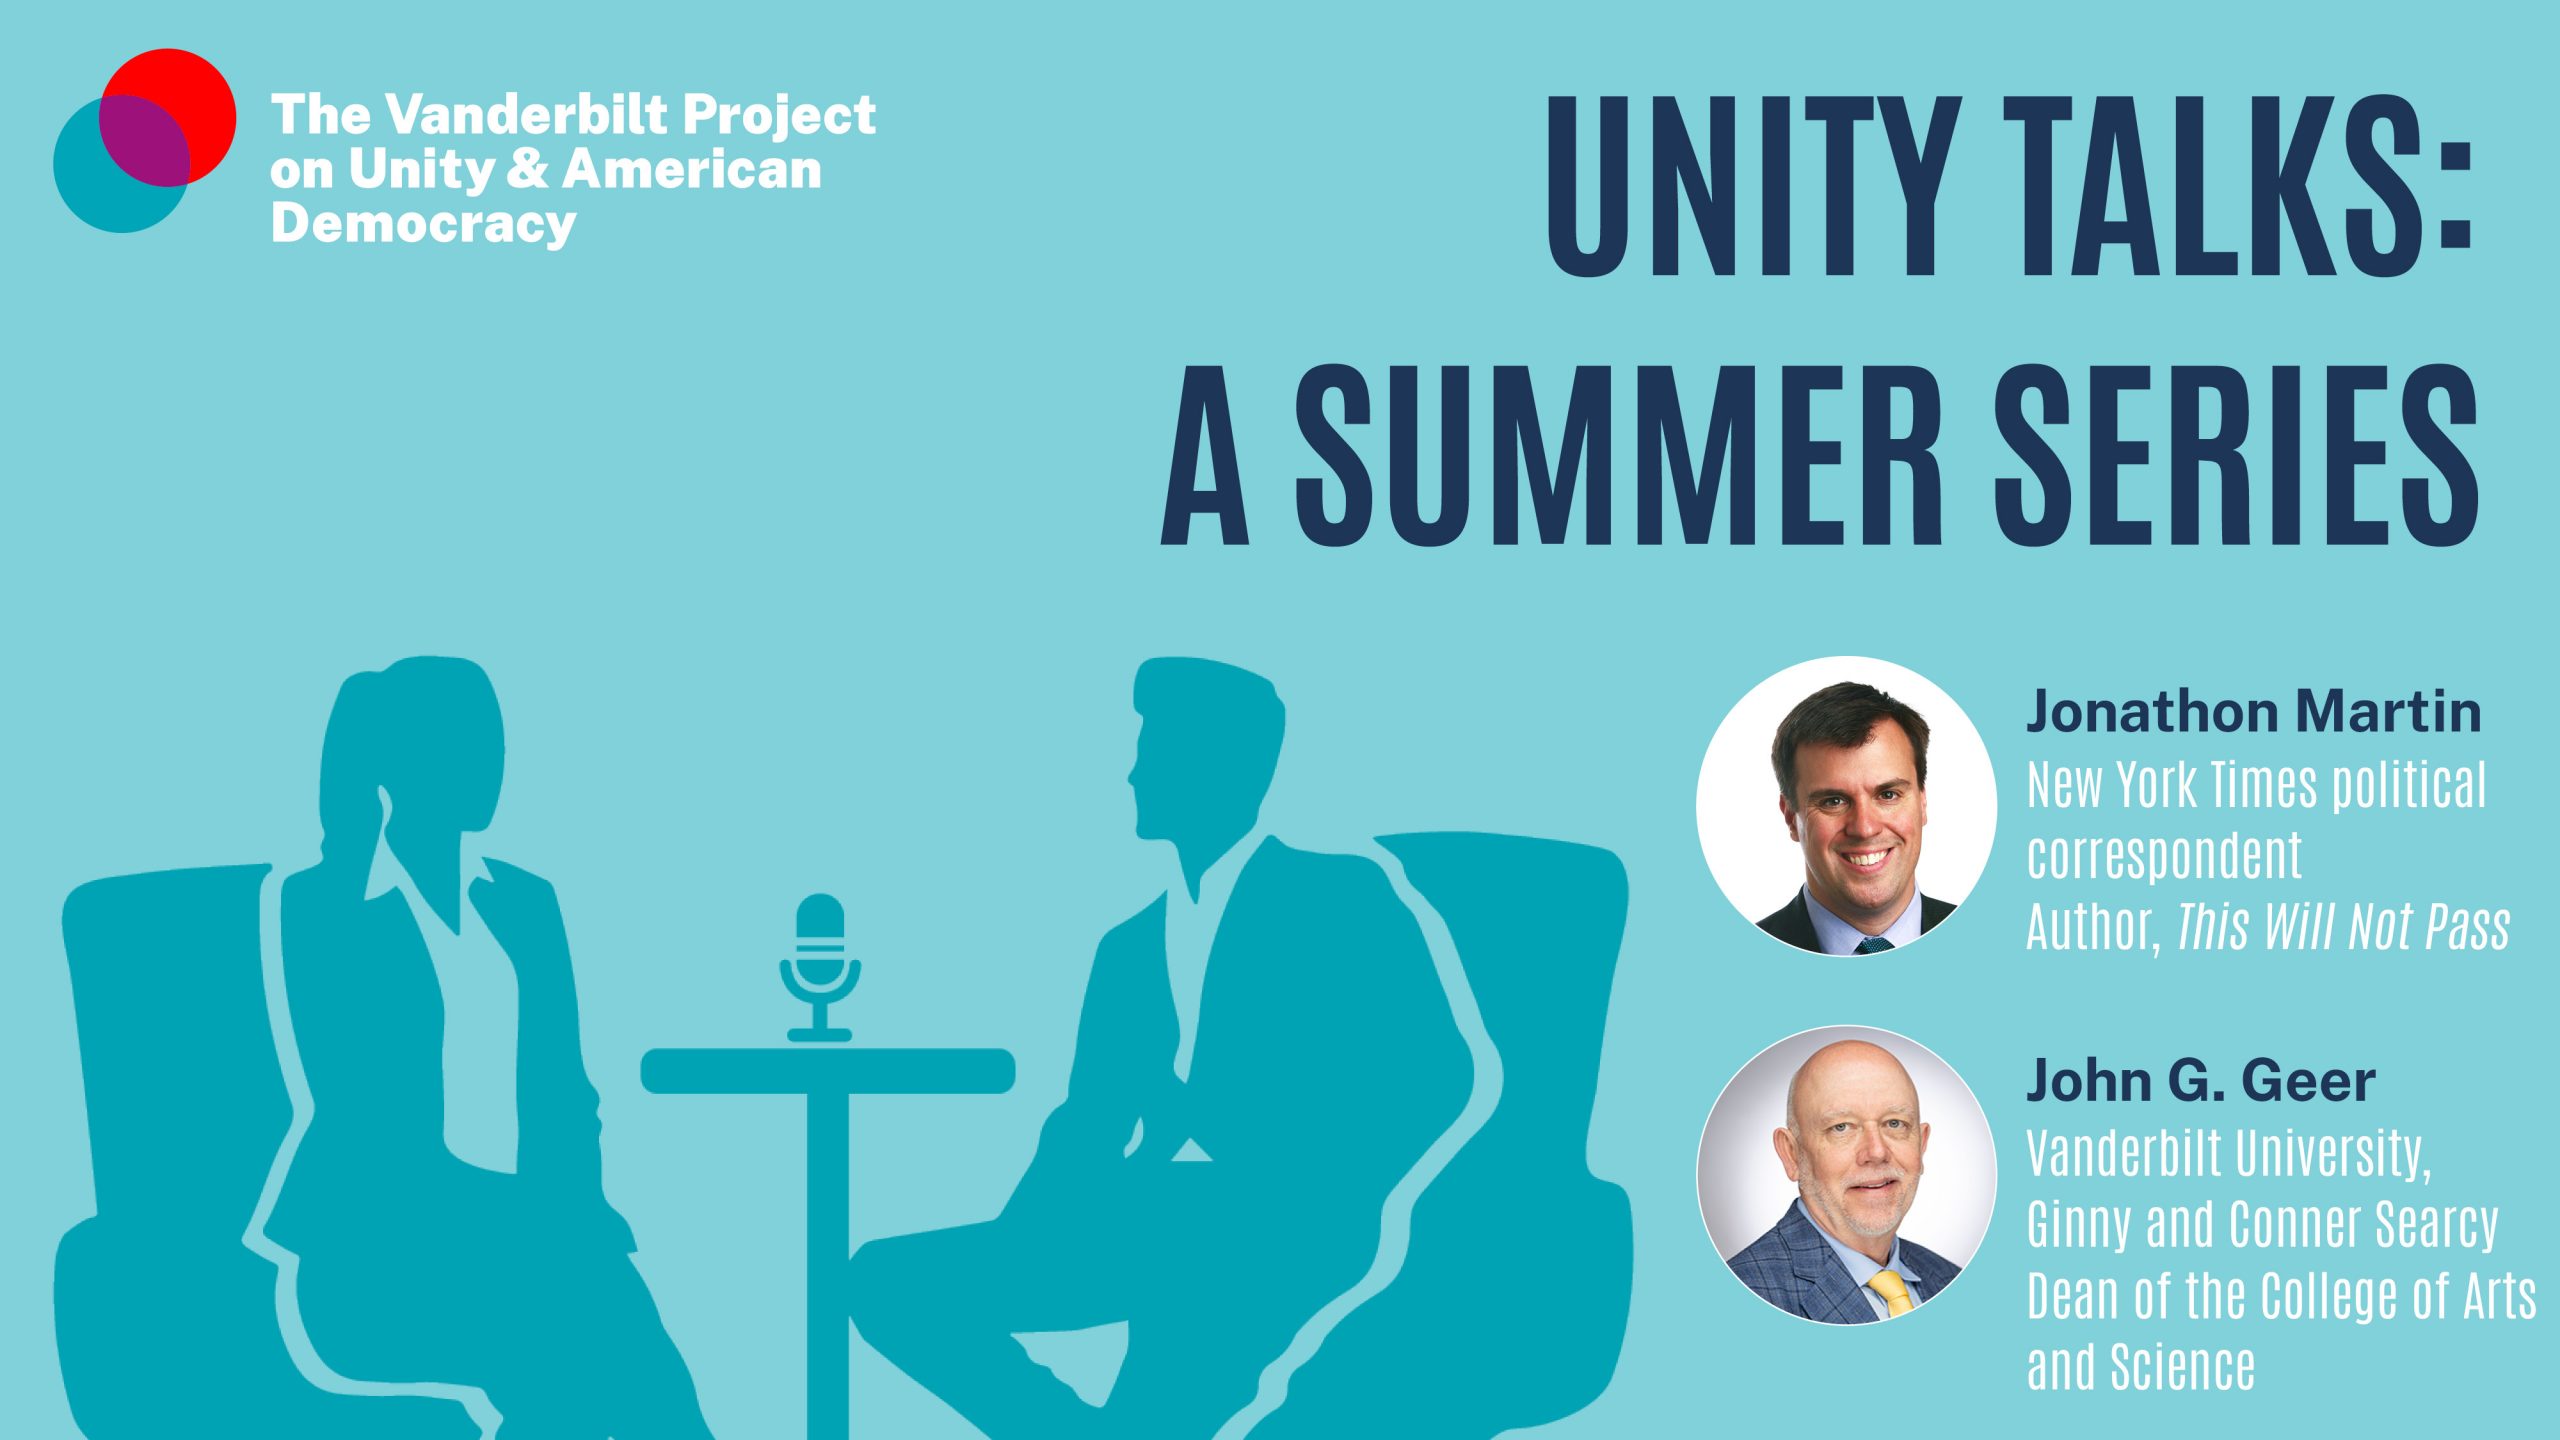 Unity Talks: Geer and Martin